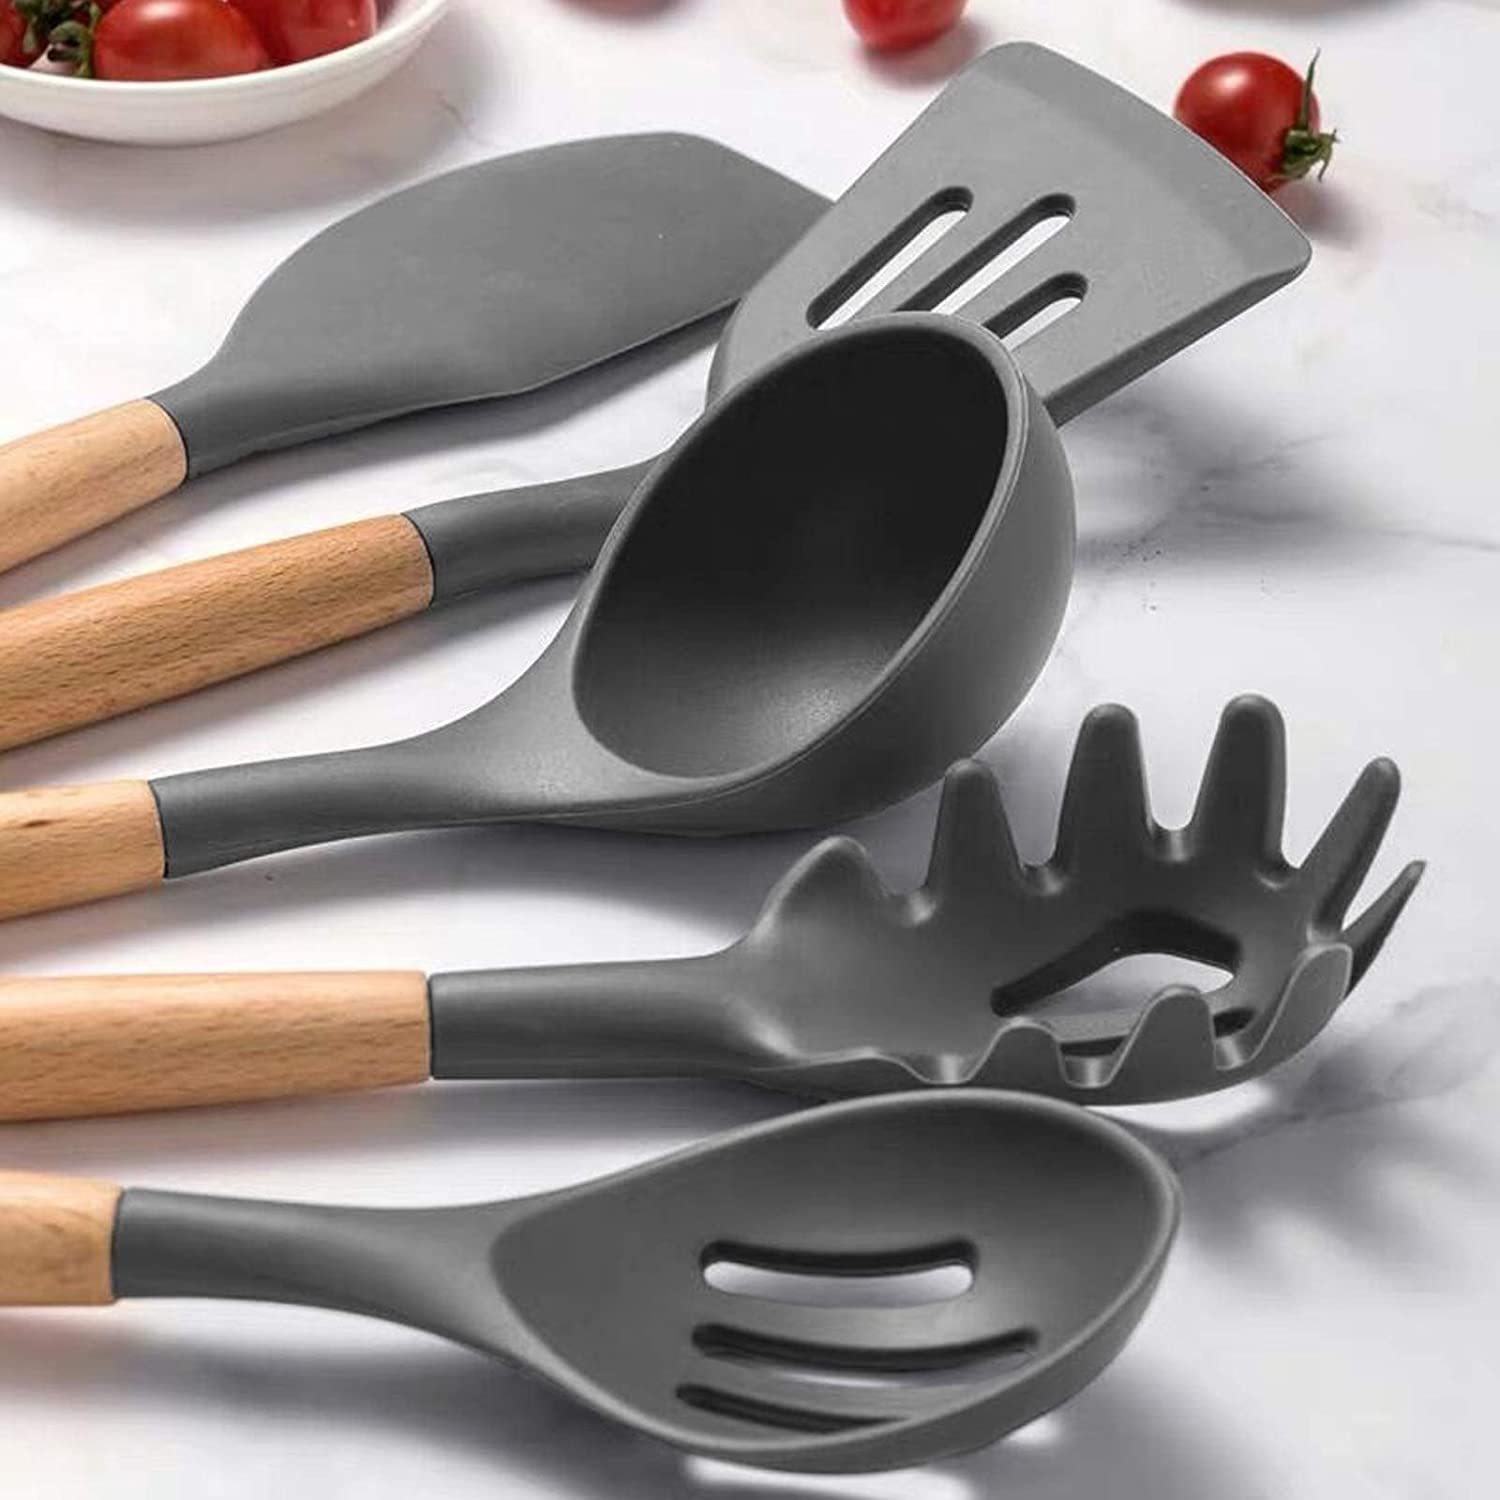 Alciono Silicone Kitchen Spatula and Utensils Spoon Set | Silicone Heat-Resistant Non-Stick Utensil Set Cooking Tools | Turner, Whisk, Spoon, Brush, Spatula, Ladle ,Slotted, Tongs ,Pasta Fork, Set of 10 item | Grey